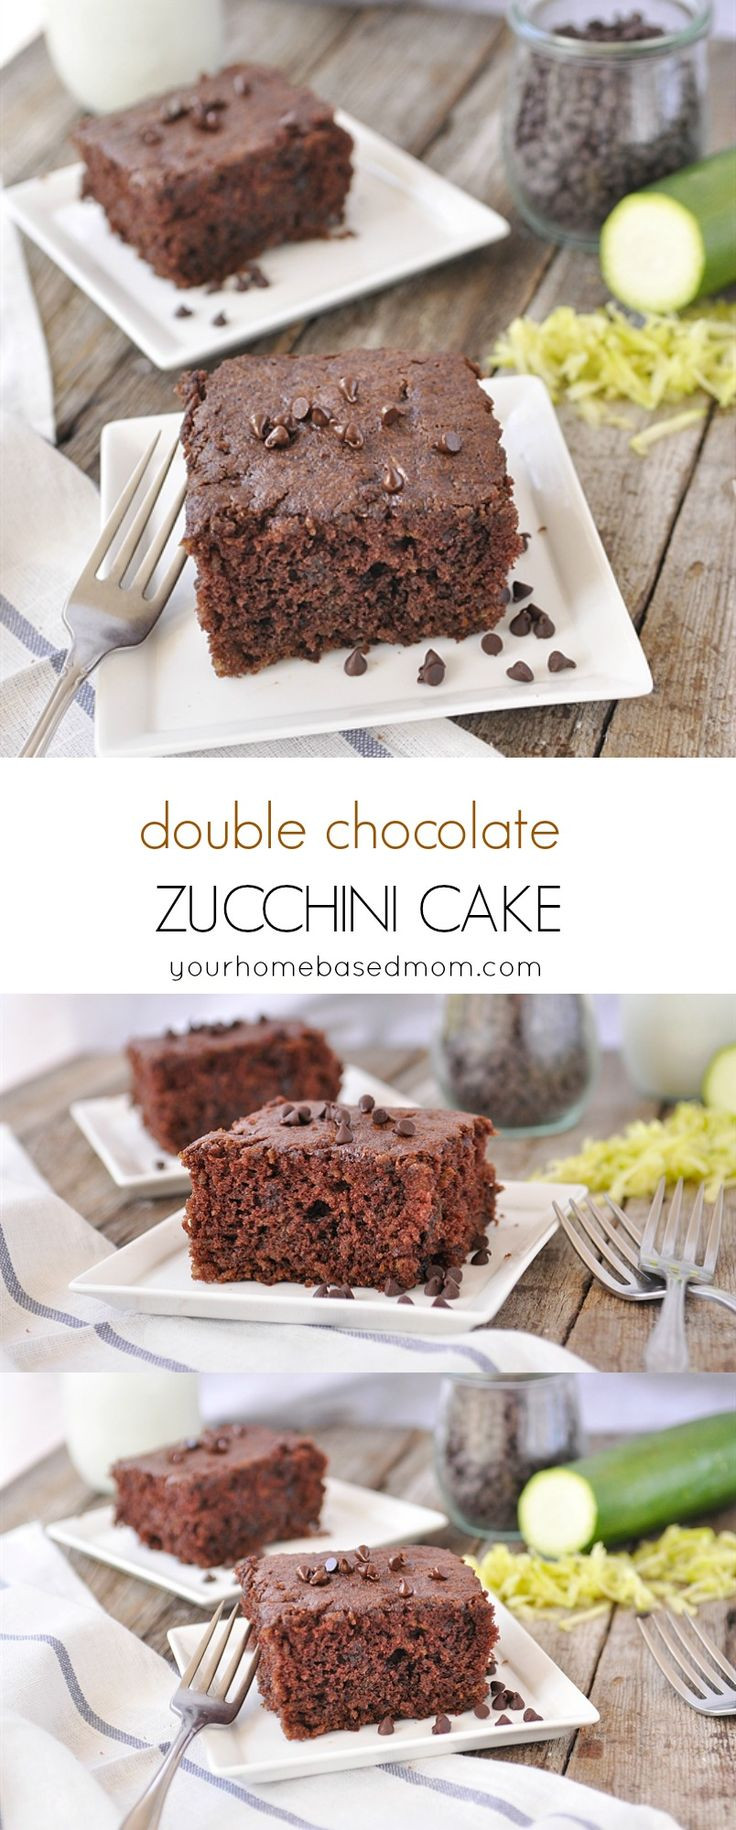 Zucchini Desserts Healthy
 2780 best images about Cakes Cupcakes Pies Crumbles